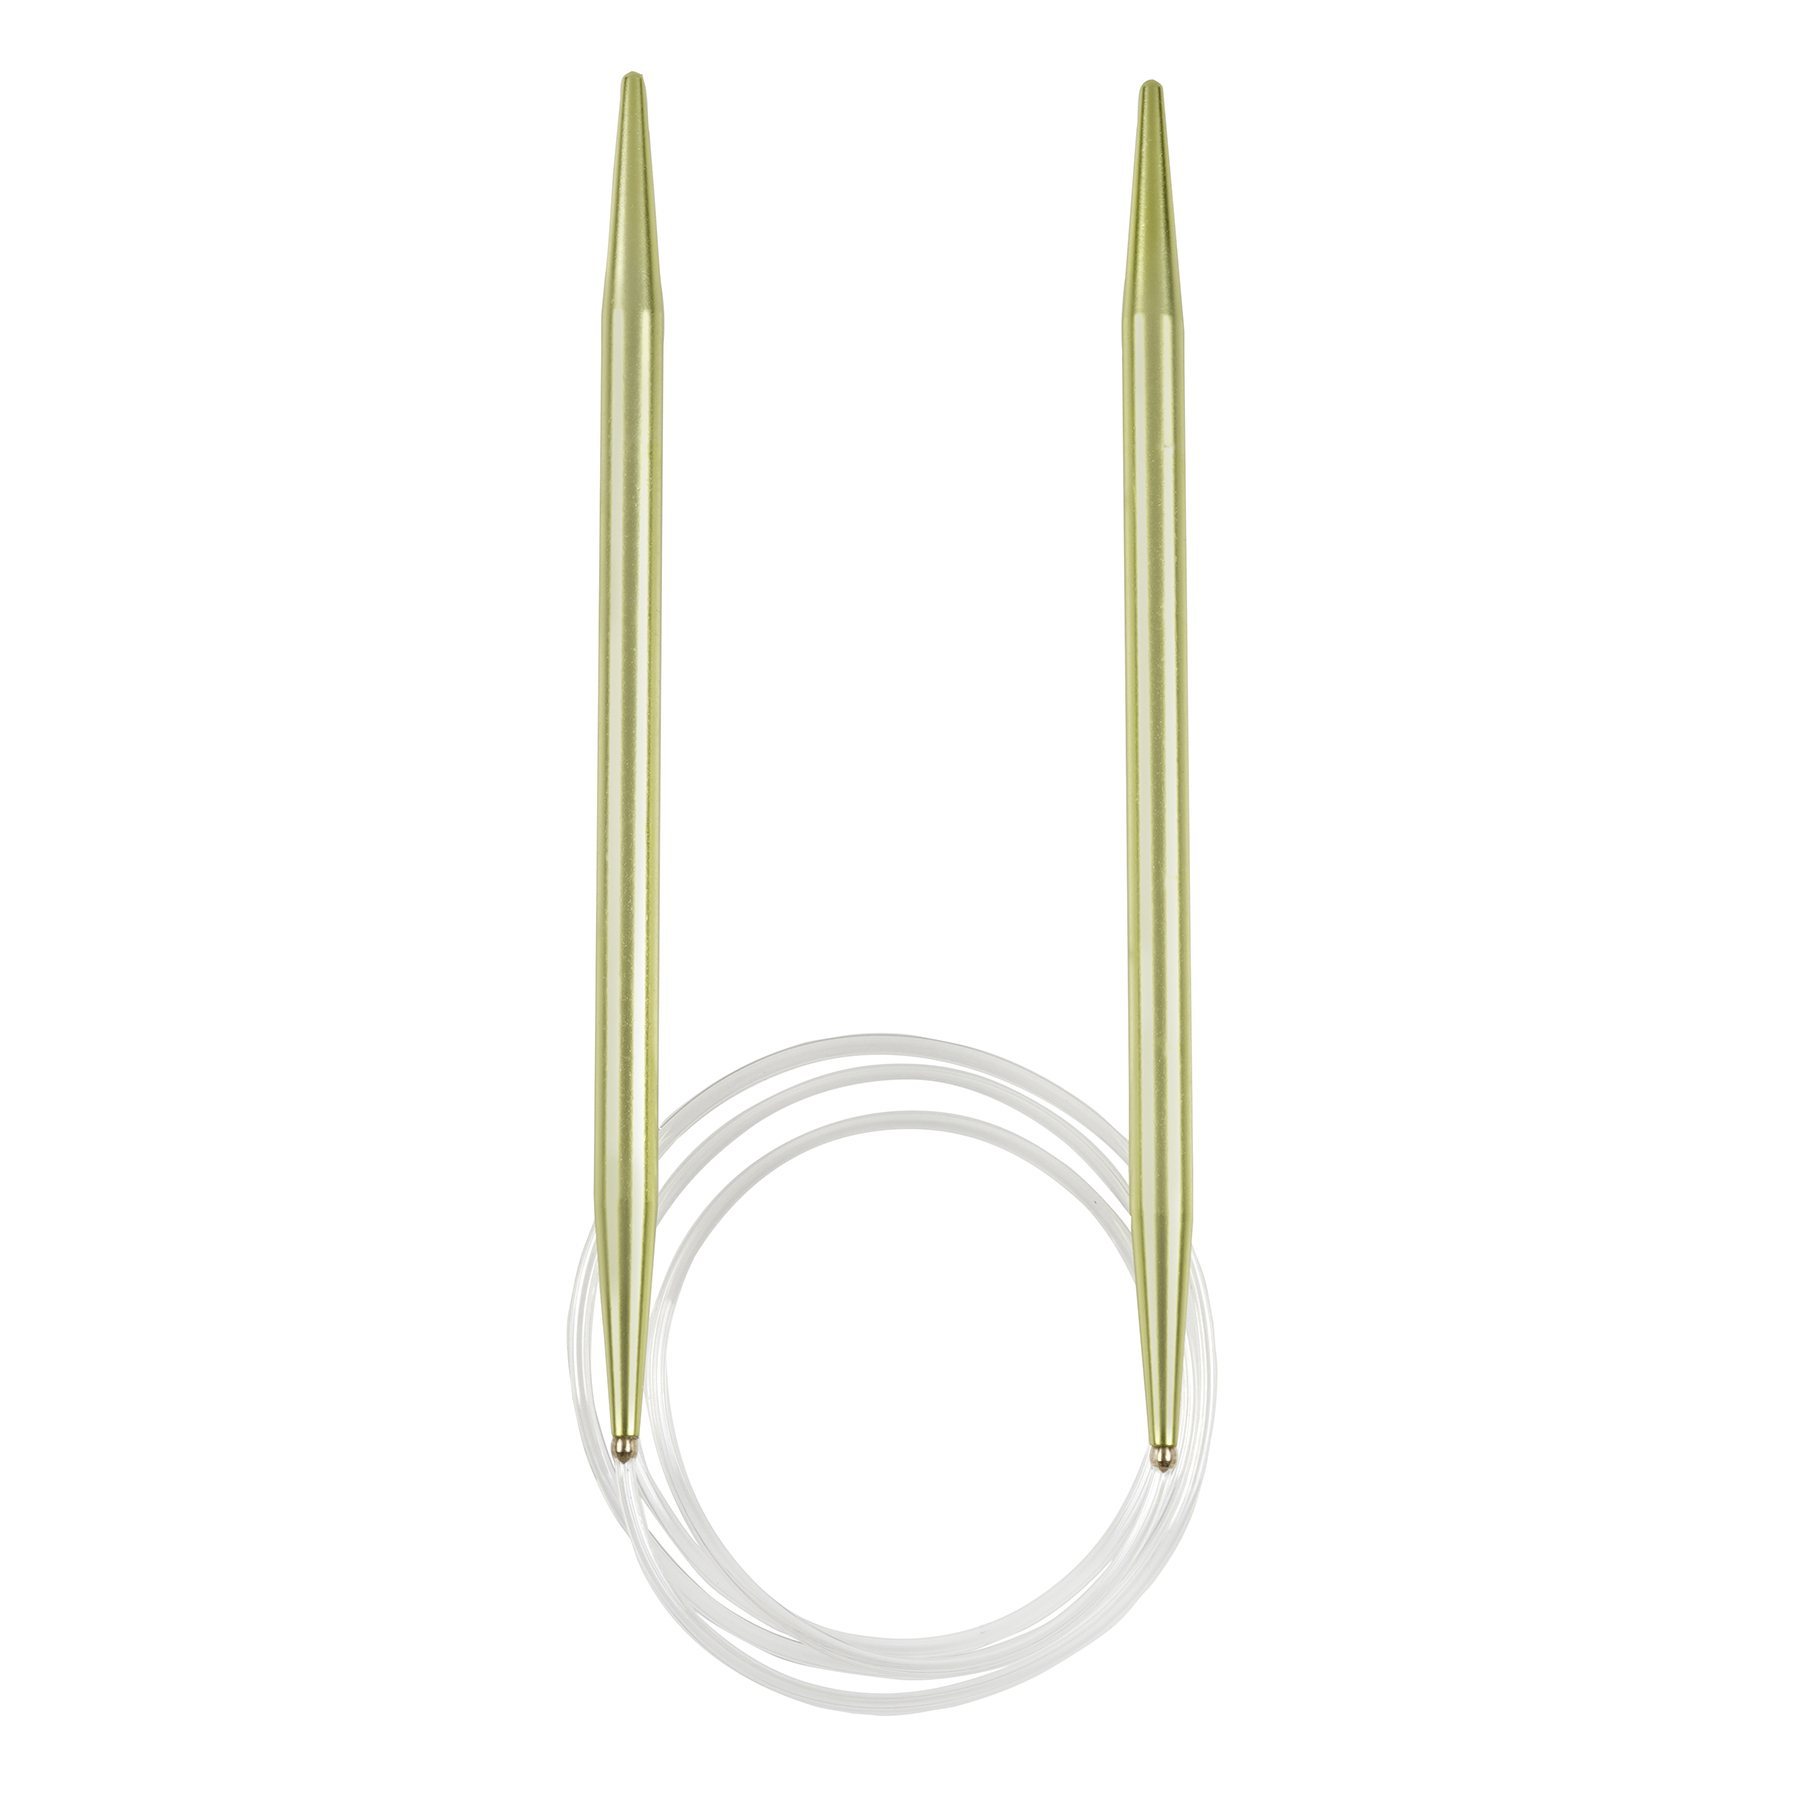 36 Circular Knitting Needles by Loops & Threads | US 10.5 / 6.5mm | Michaels